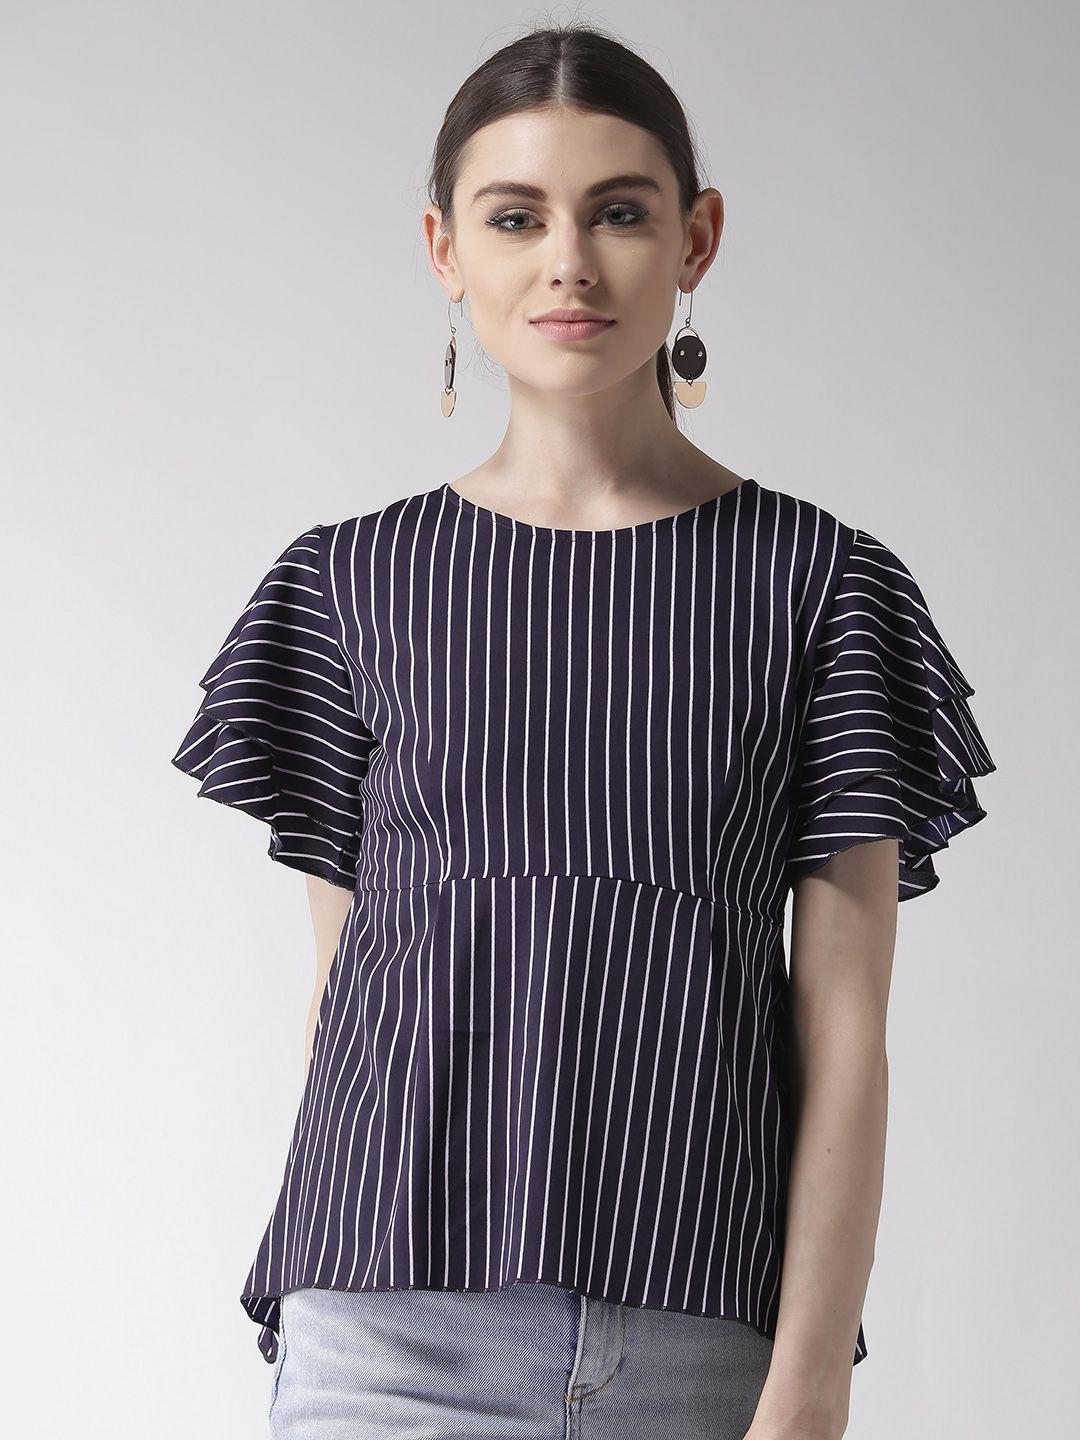 style quotient women navy blue & white striped a-line top